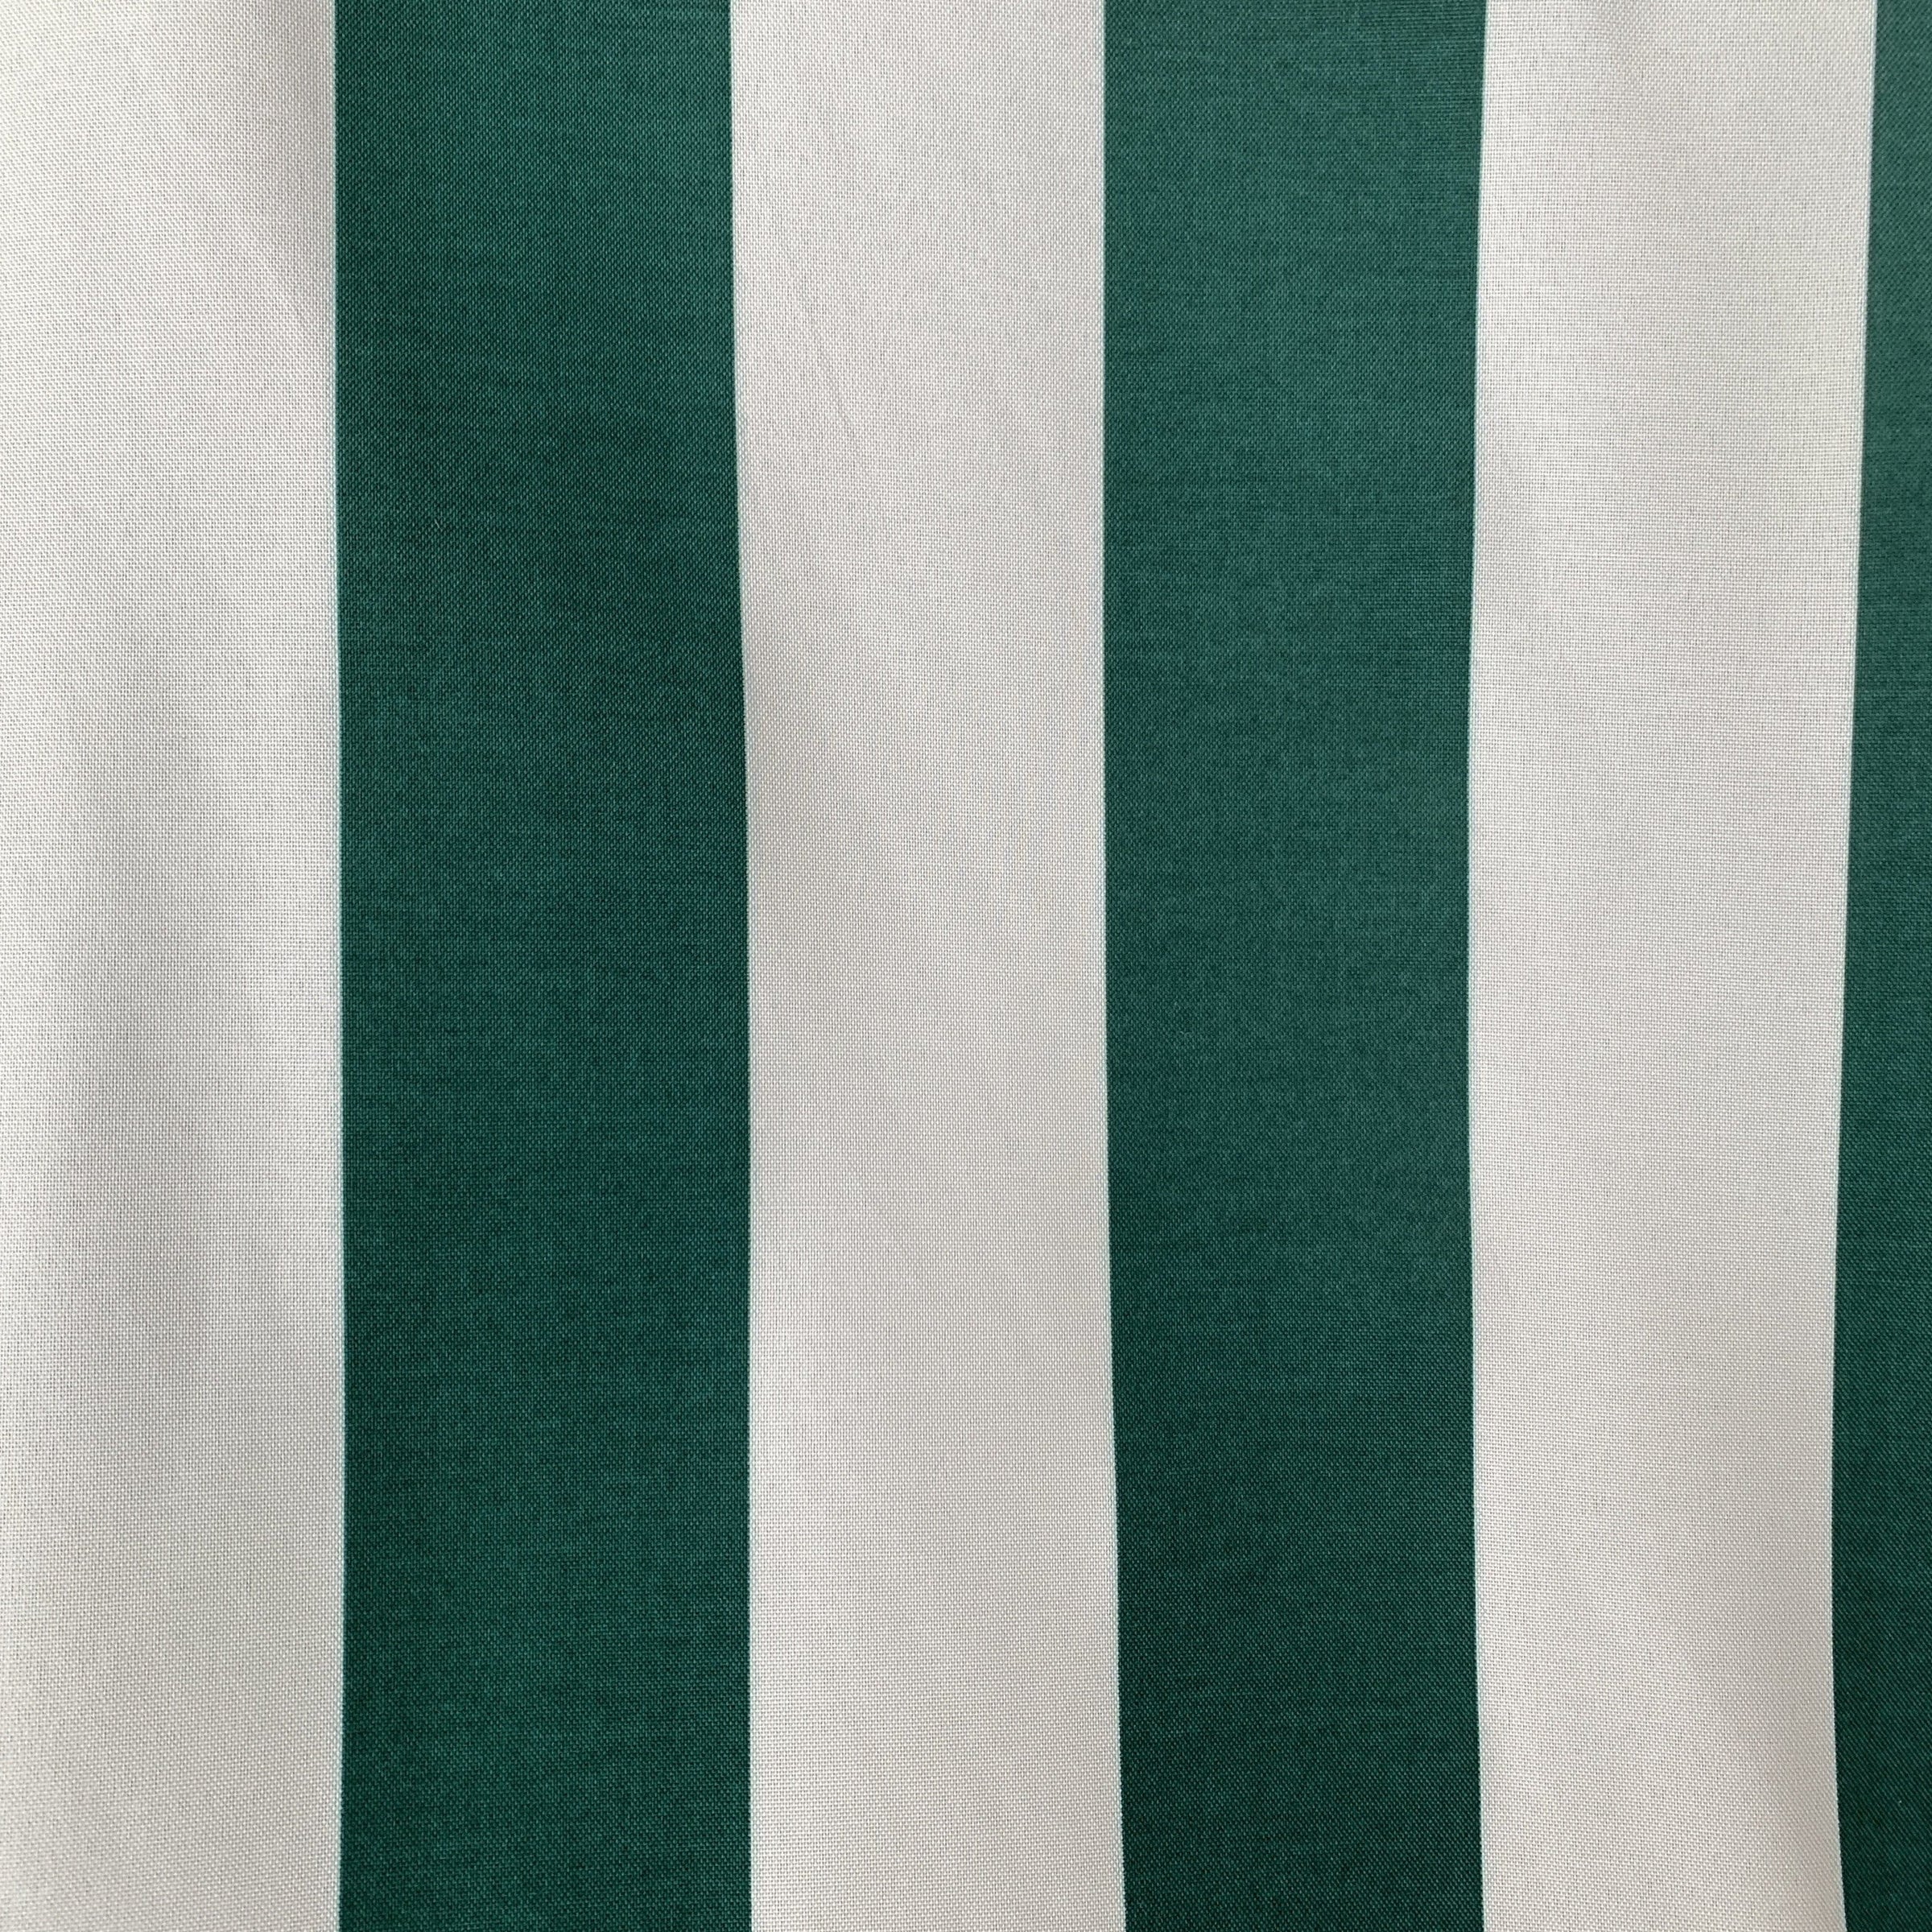 Green and white striped outdoor fabric.